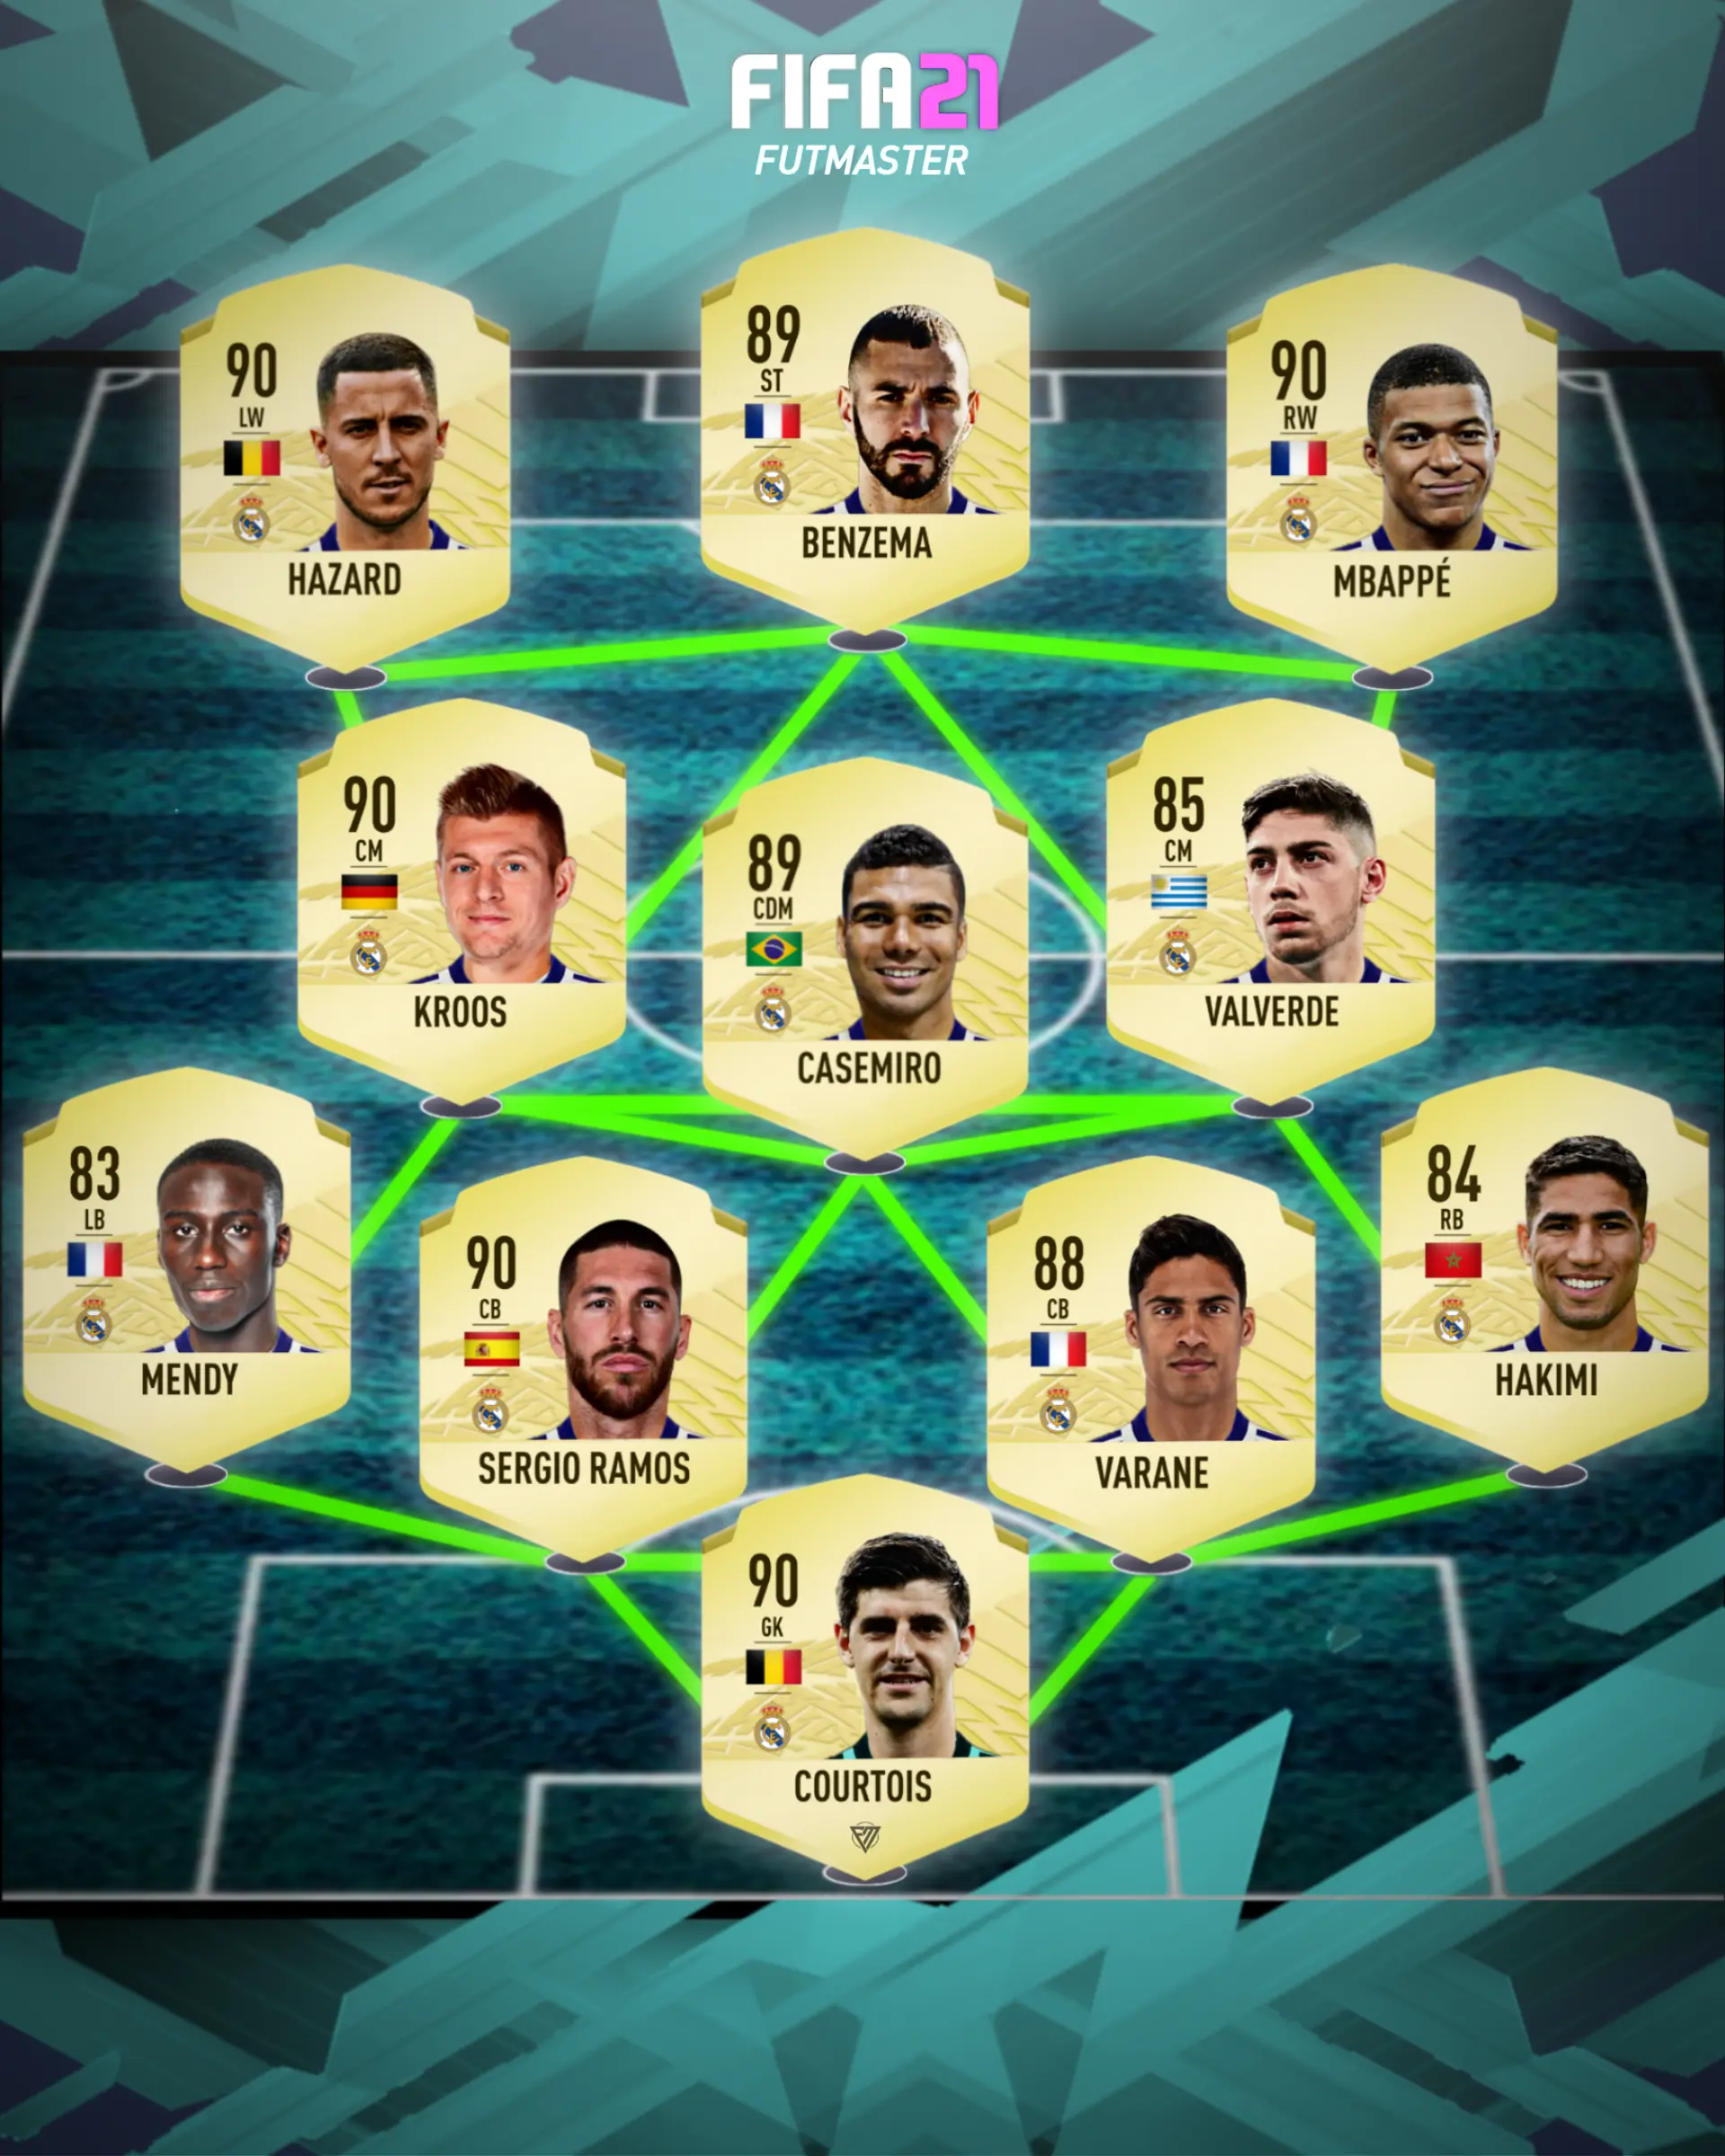 Will we see a team like this next season?